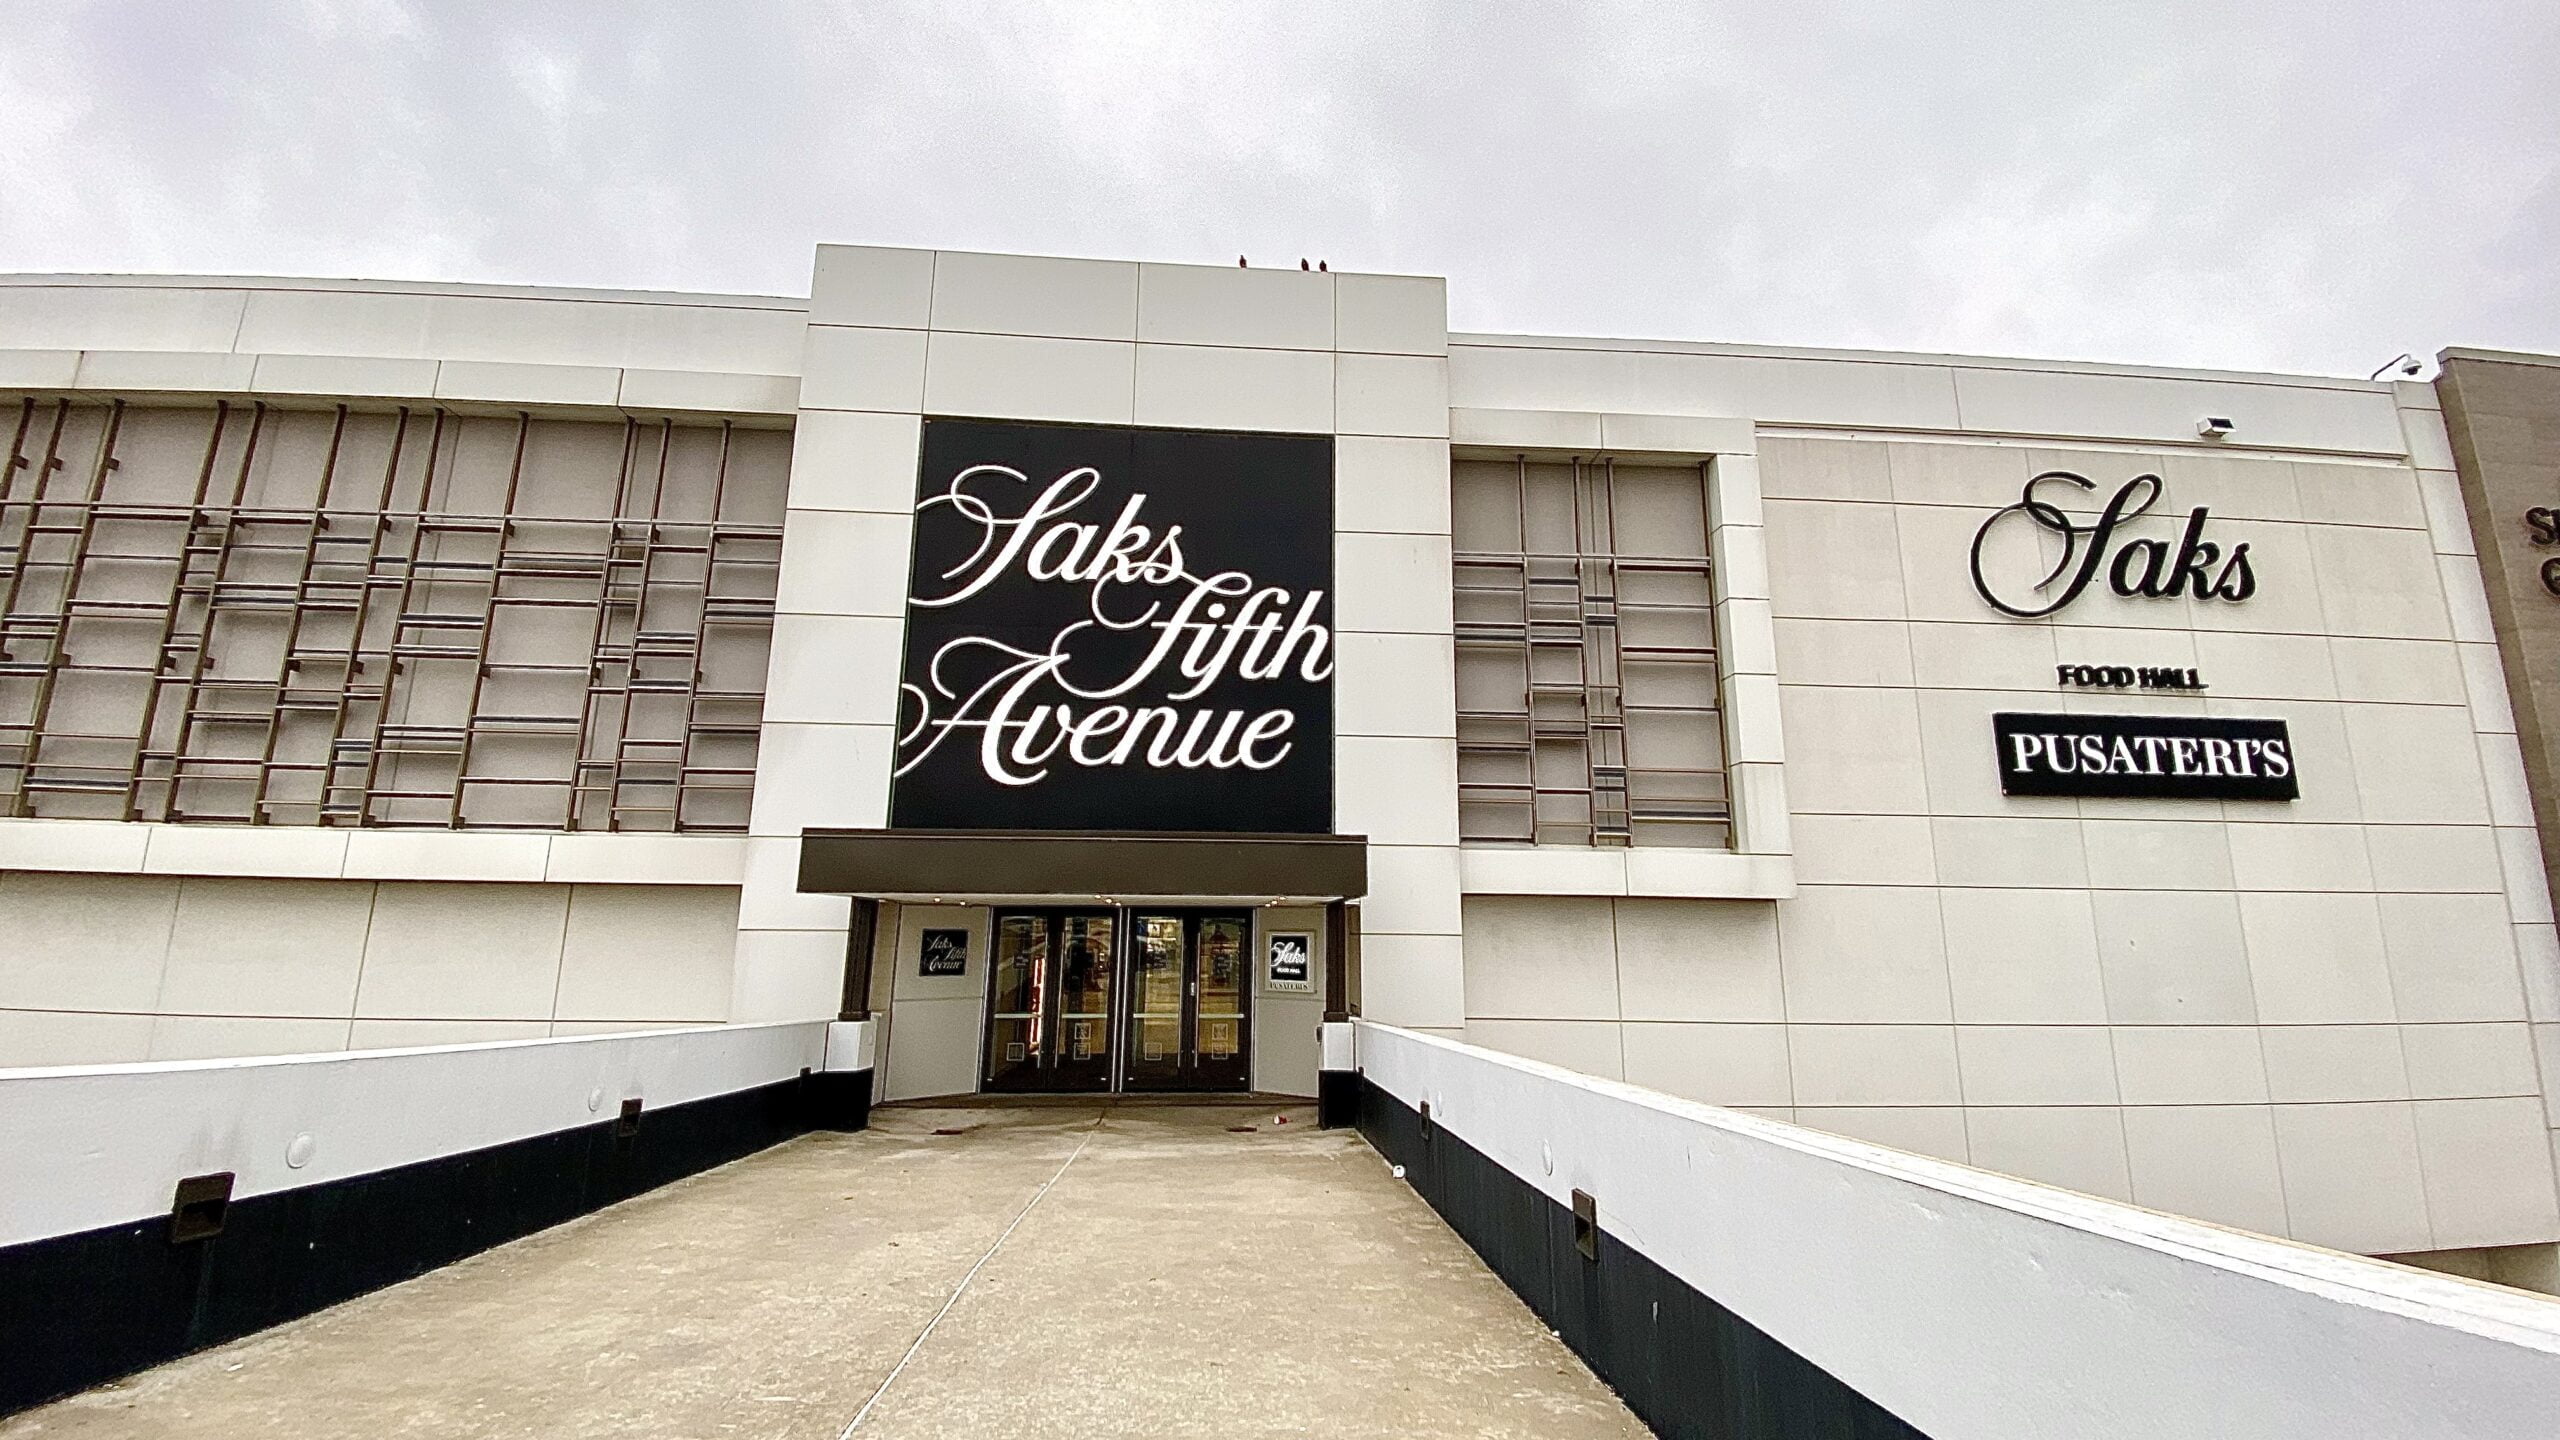 Saks OFF 5th is permanently closing massive outlet store near Toronto